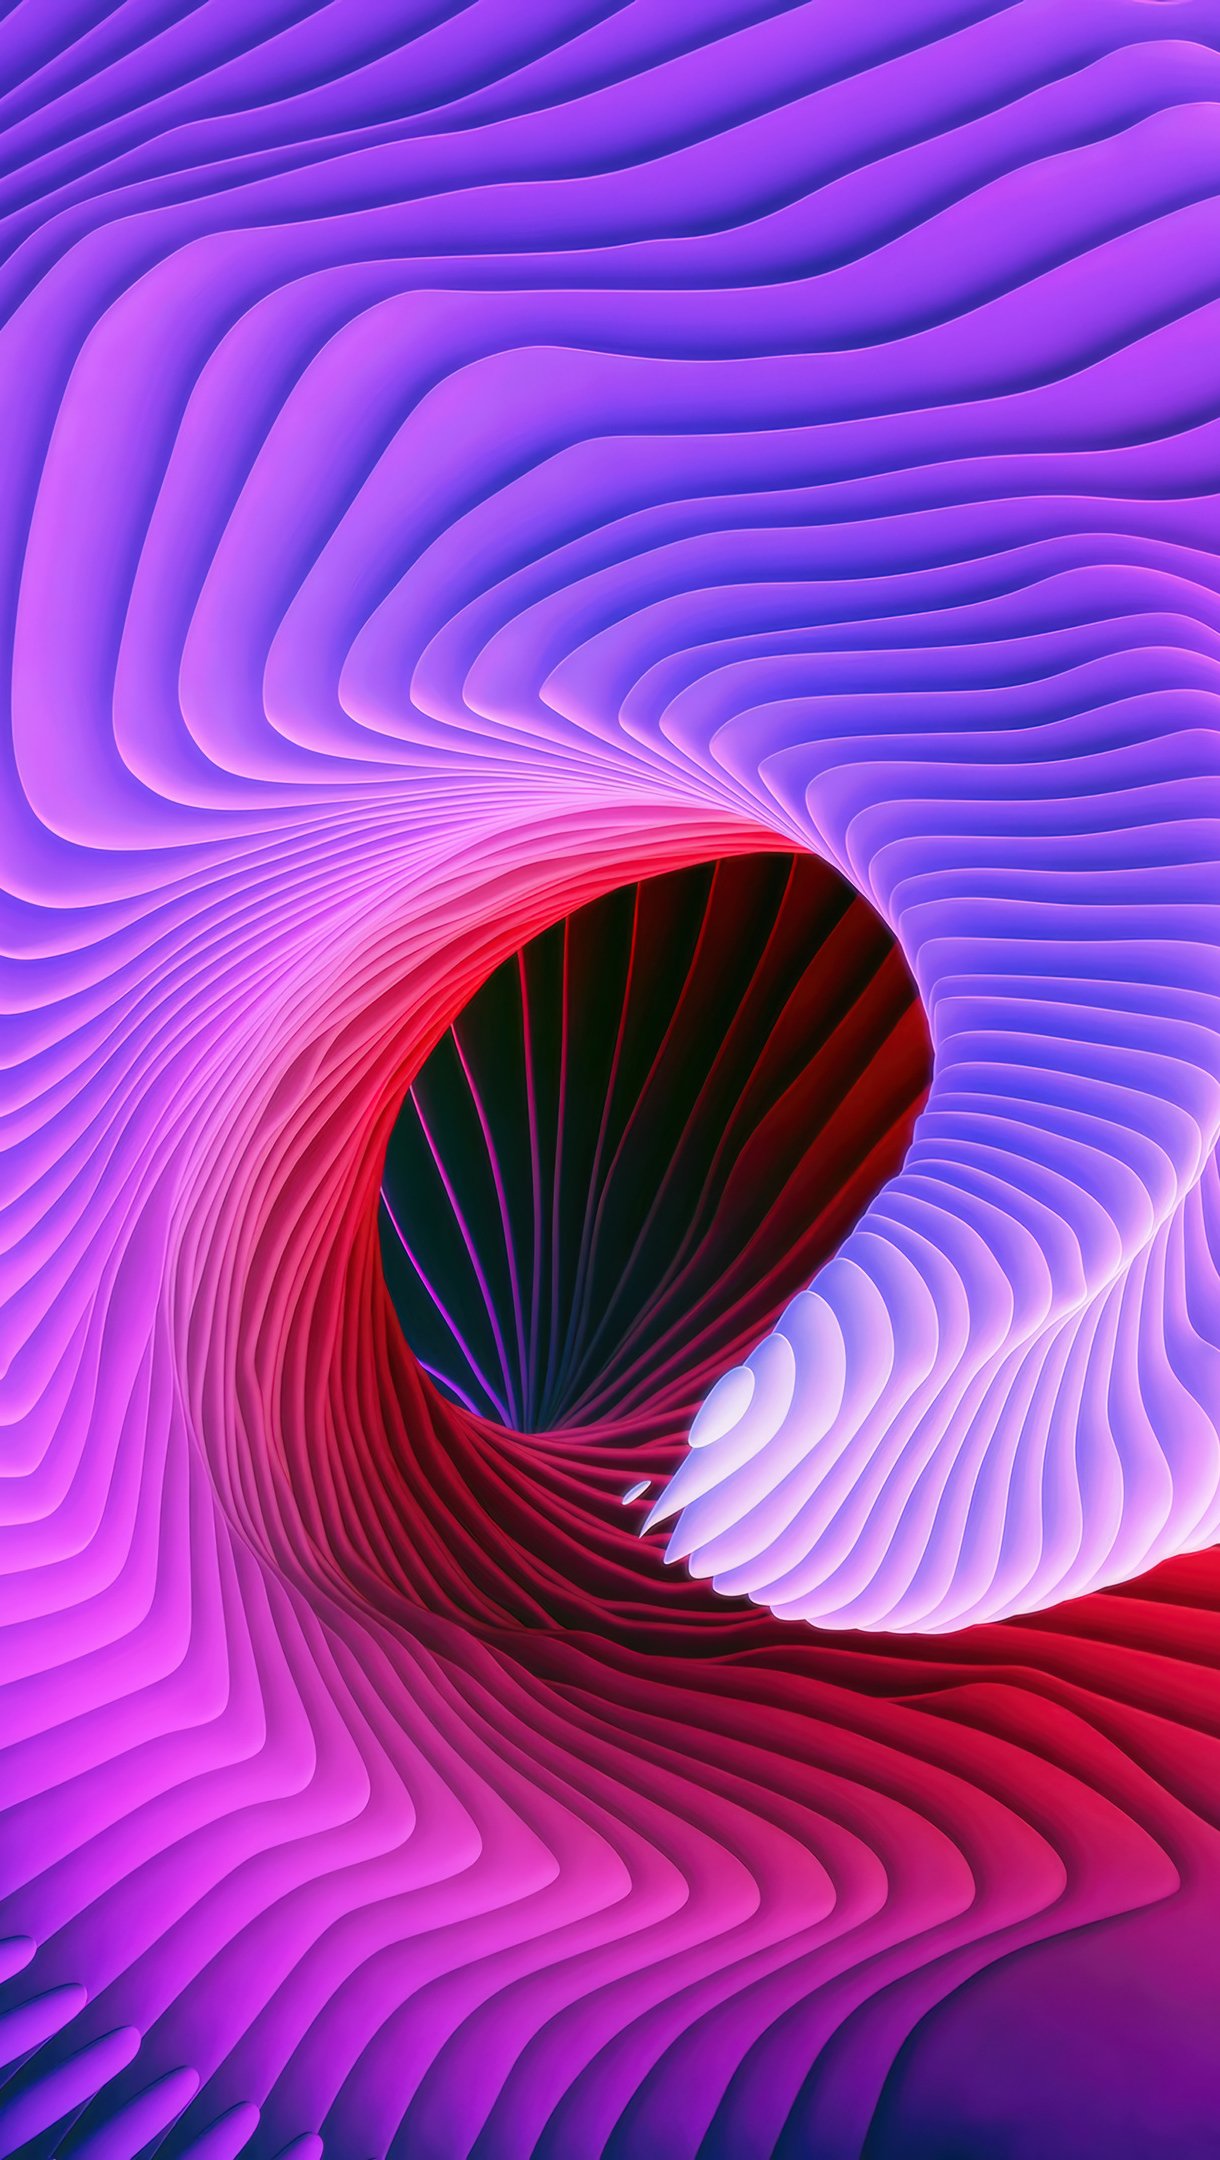 Colorful spiral Abstract MacOS Wallpaper 4k Ultra HD ID:9163